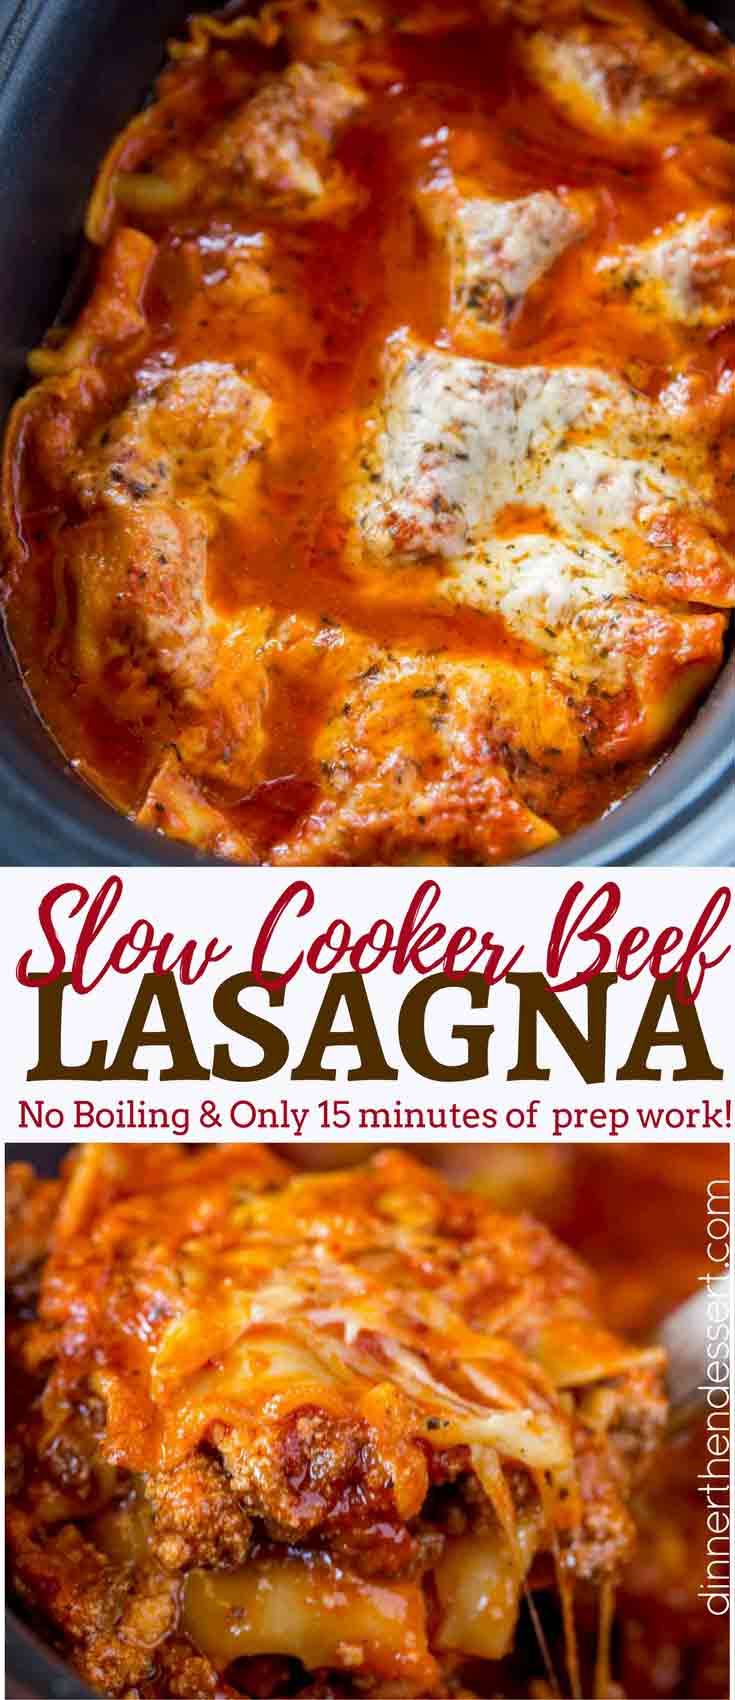 Crock Pot Lasagna with almost none of the effort of normal lasagna. Your slow cooker does all the work!